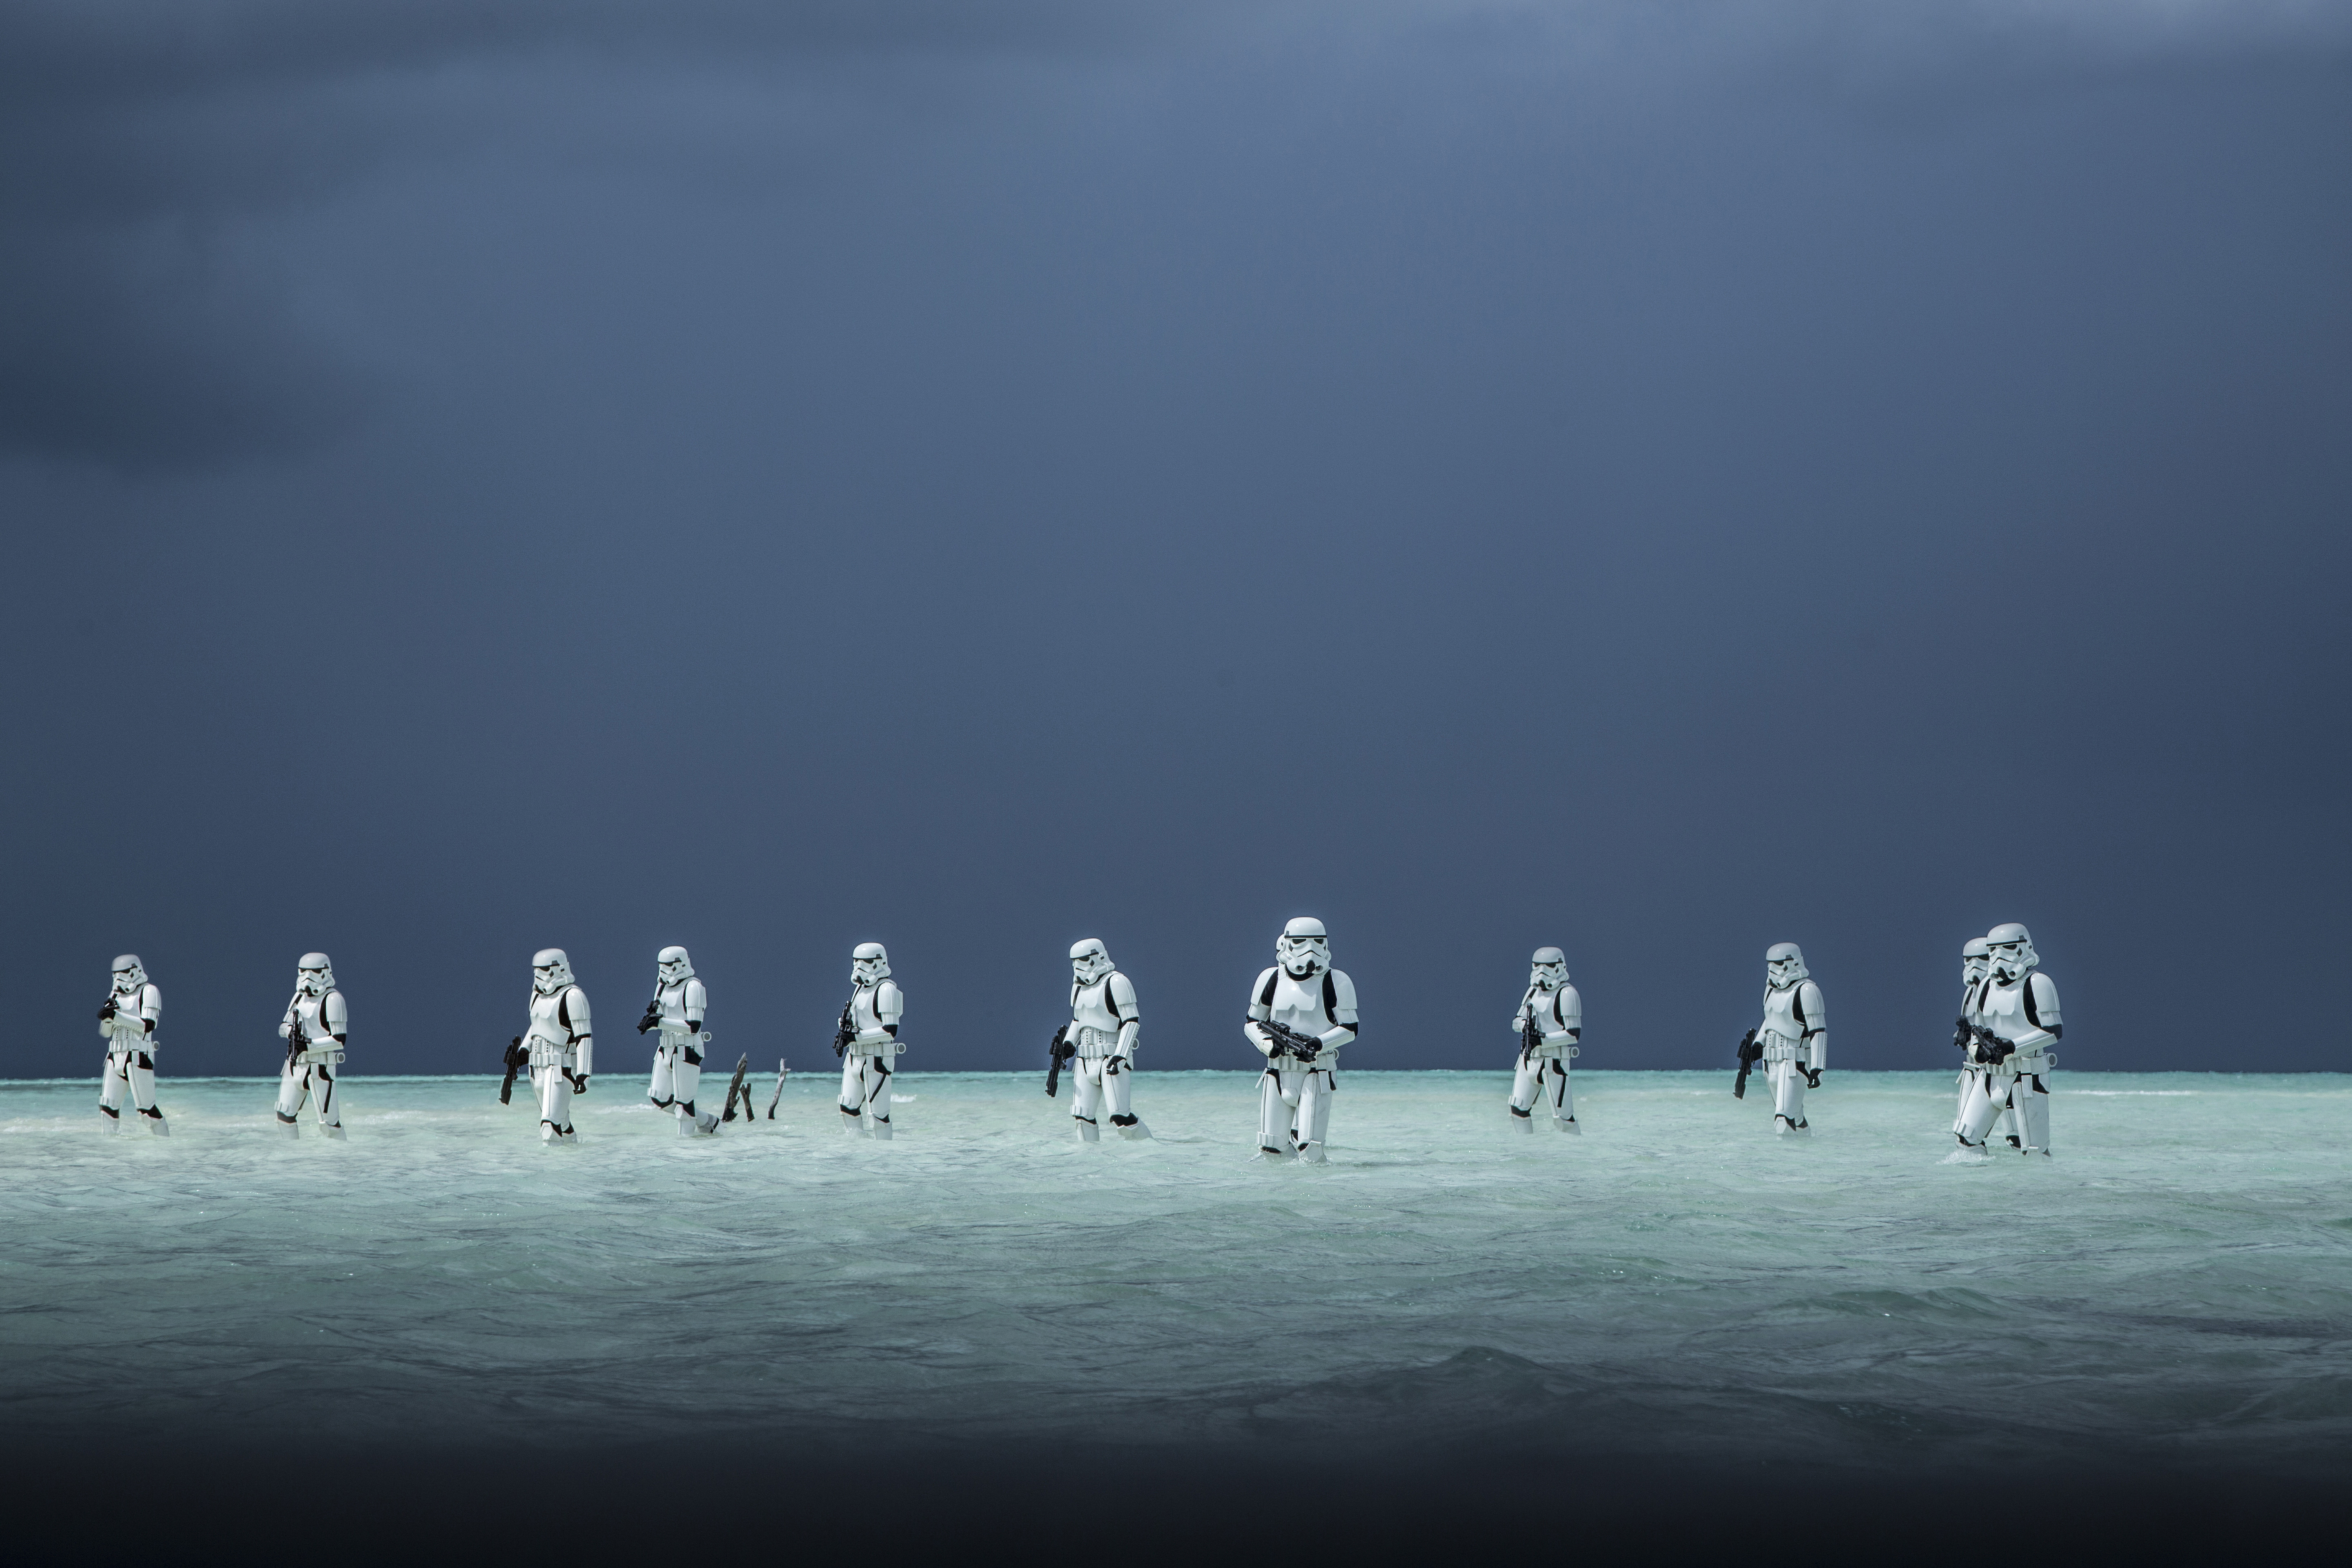 Lock Screen Rogue One: A Star Wars Story